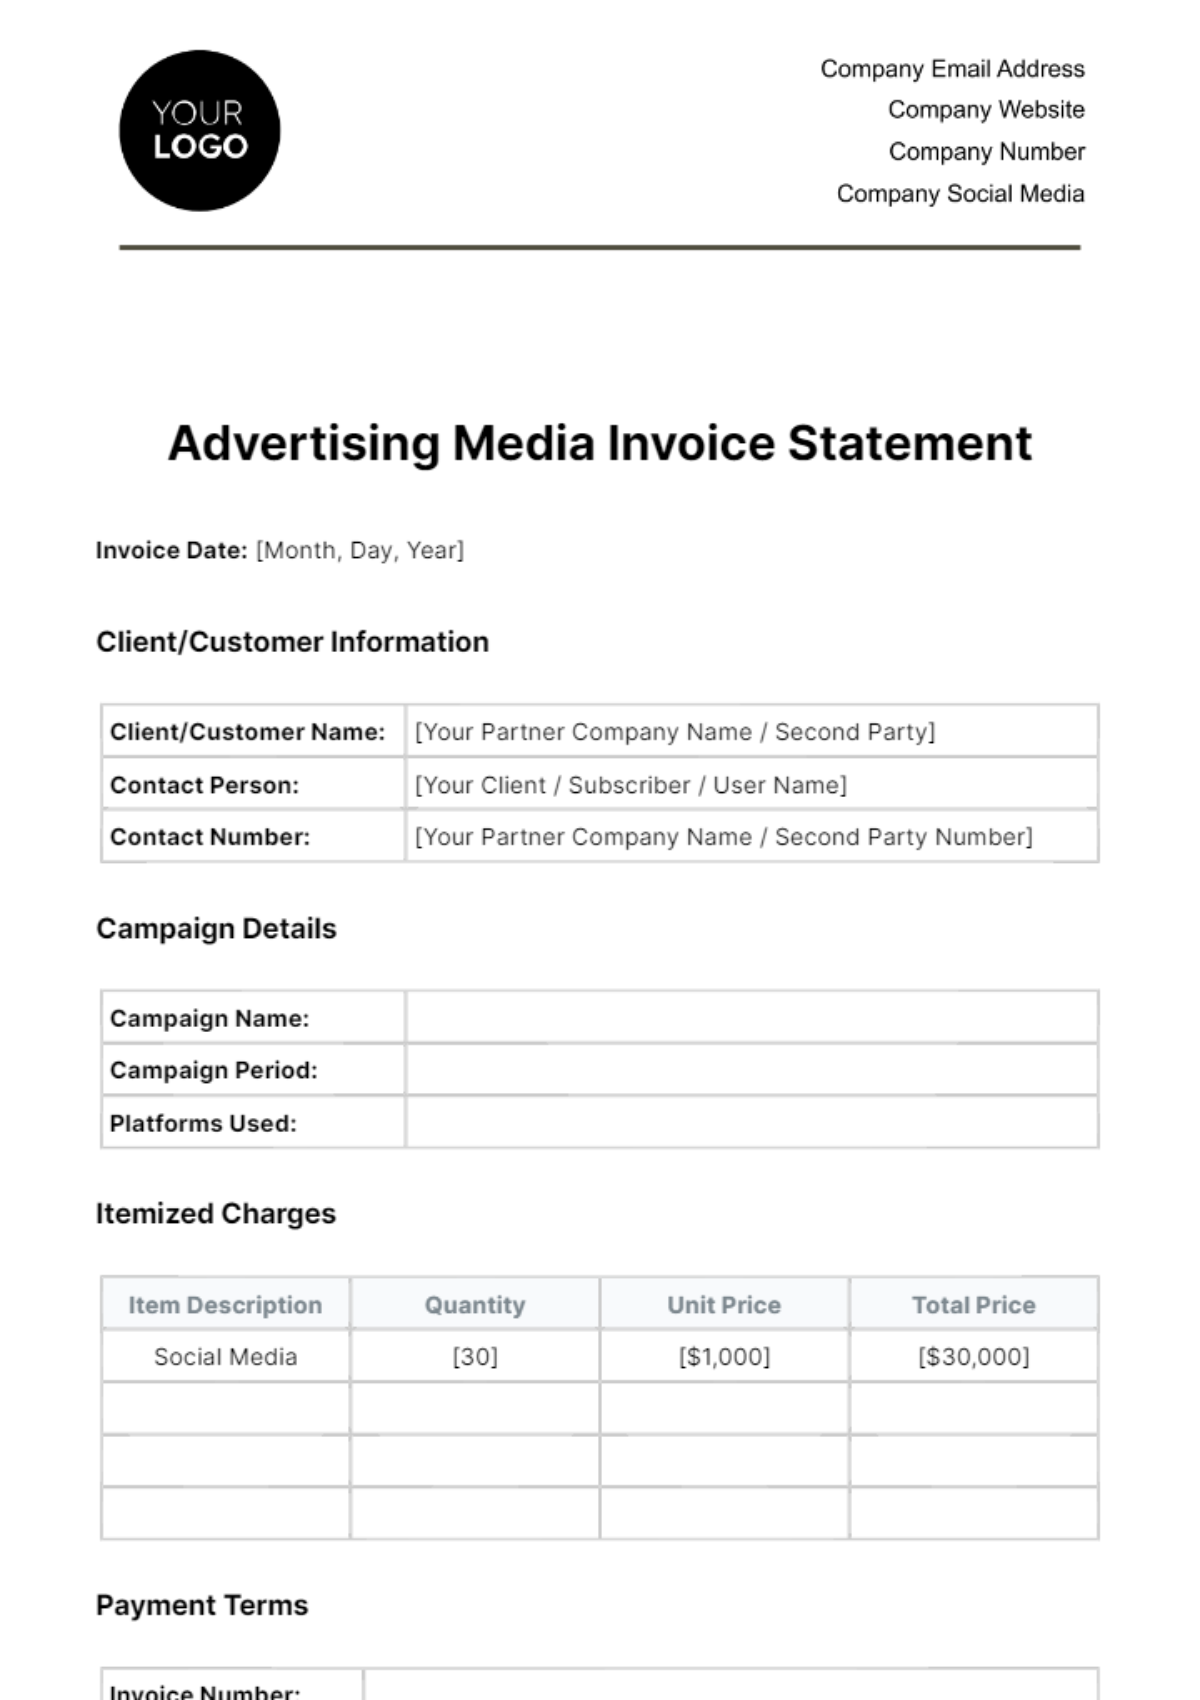 Free Advertising Media Invoice Statement Template